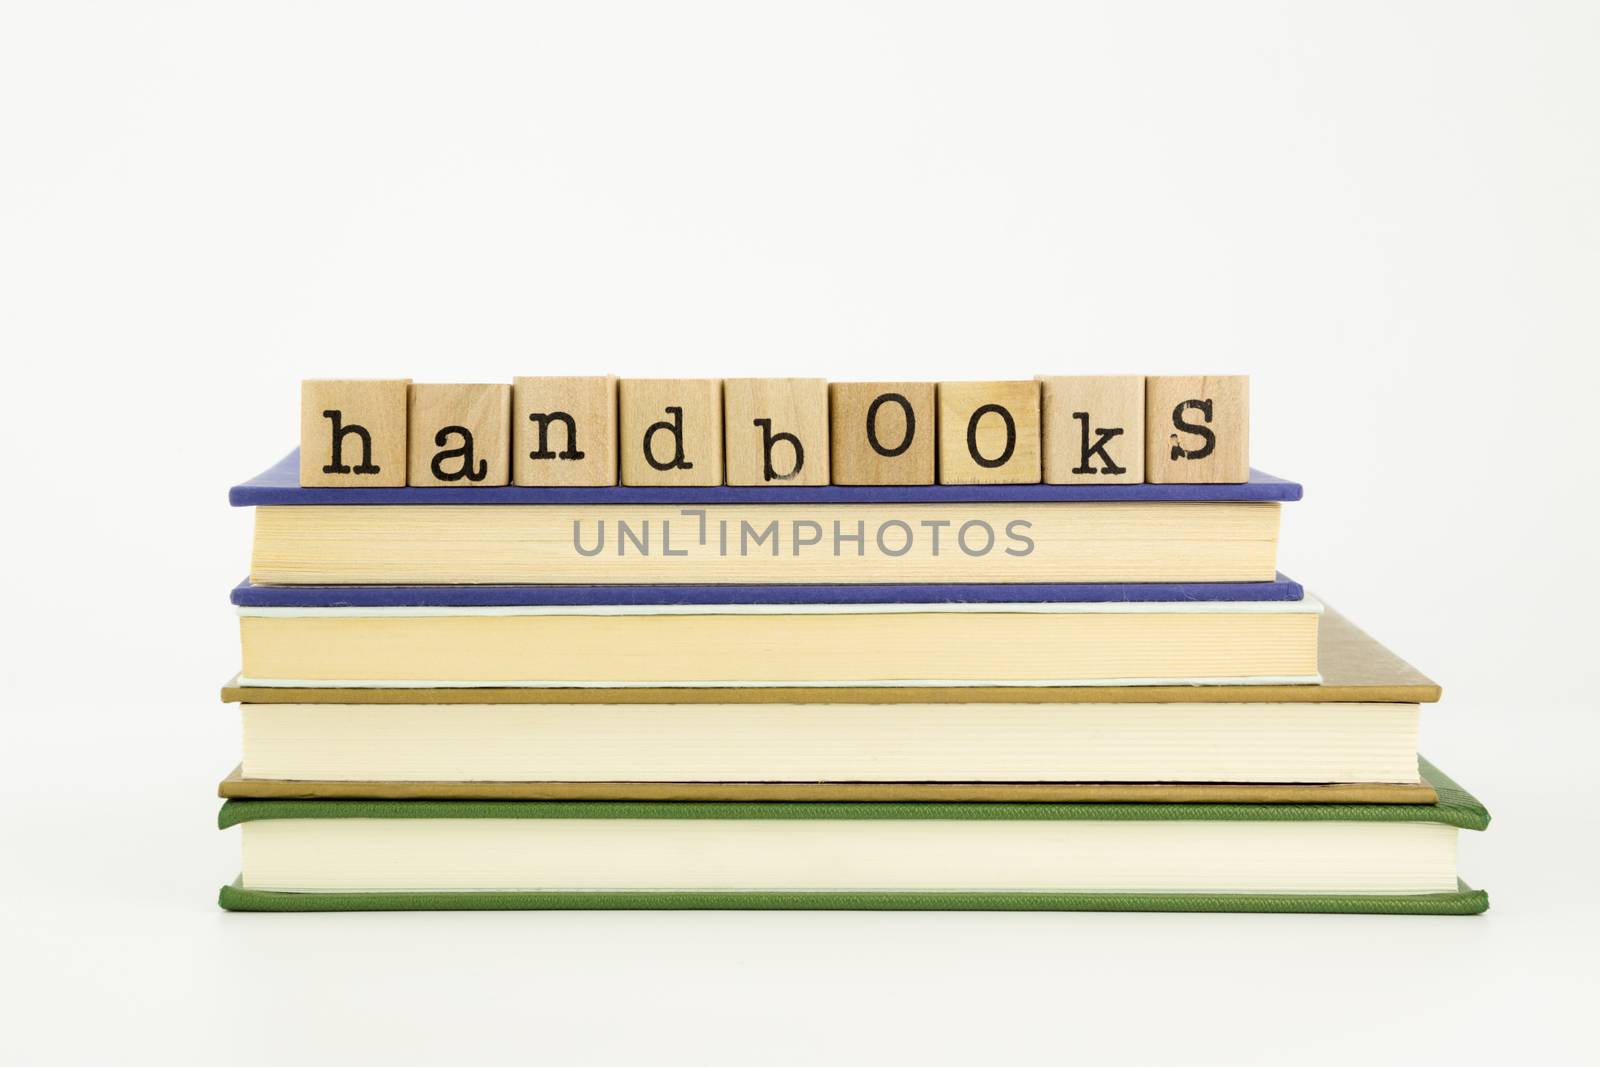 handbooks word on wood stamps stack on books, homework and academic concept